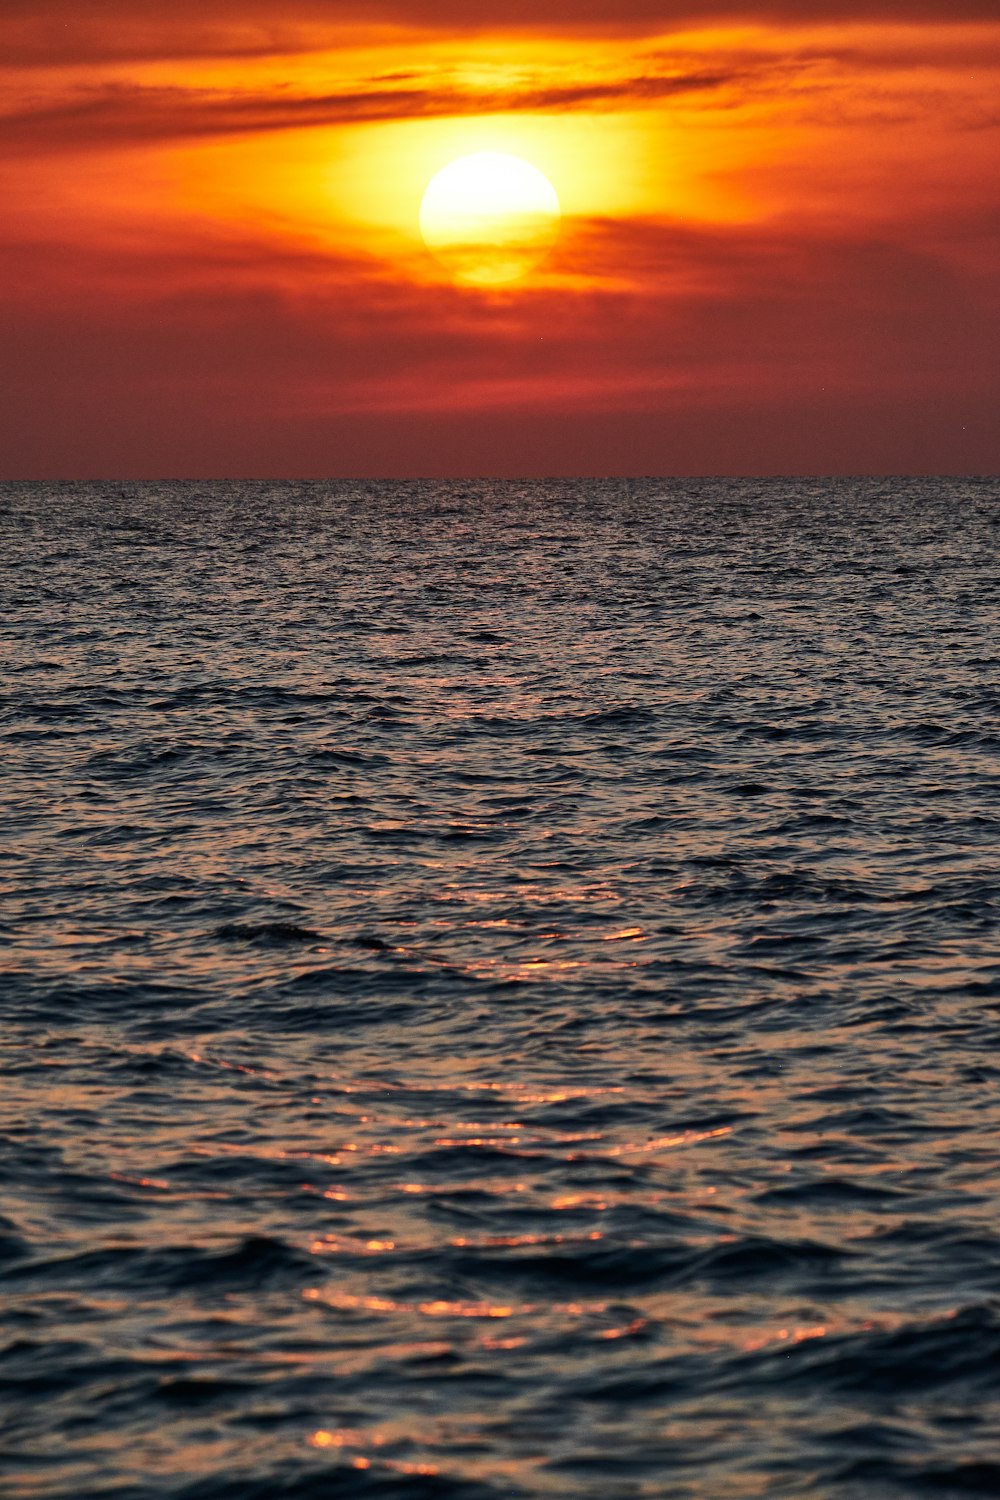 a sunset over the ocean with a boat in the water